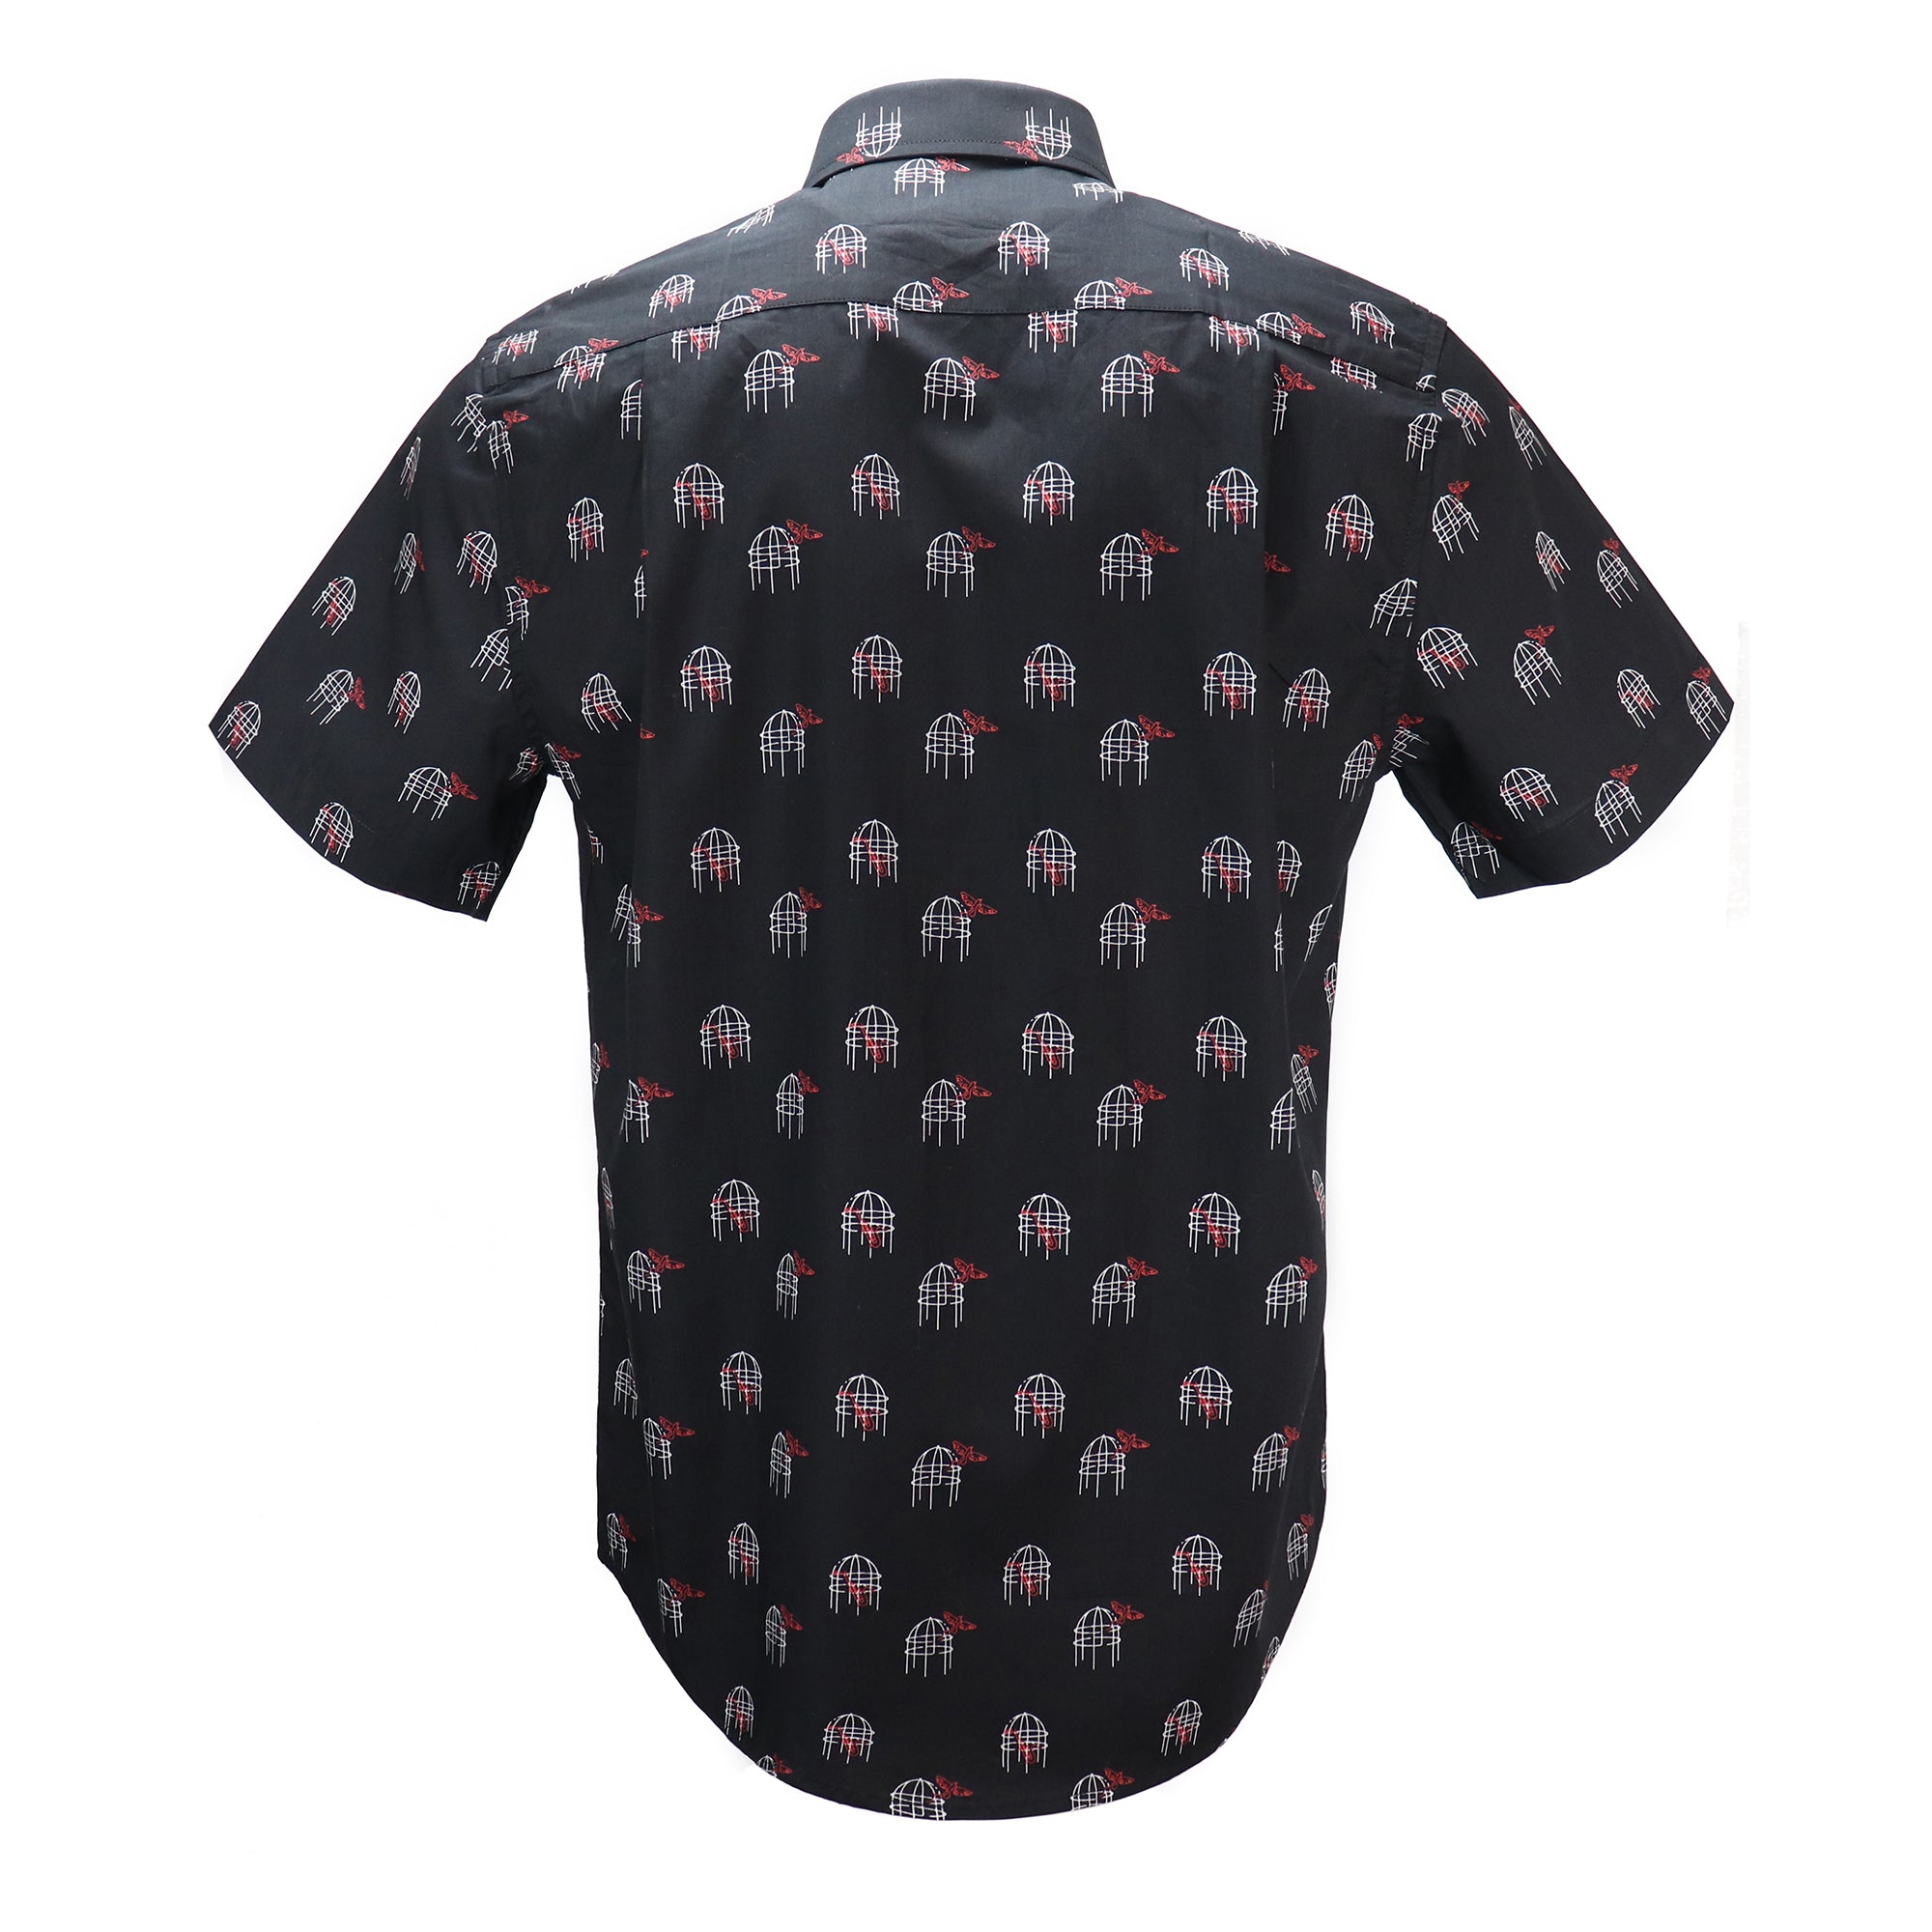 Charlie Parker Bird Cage Short-Sleeve Shirt - Section119, M